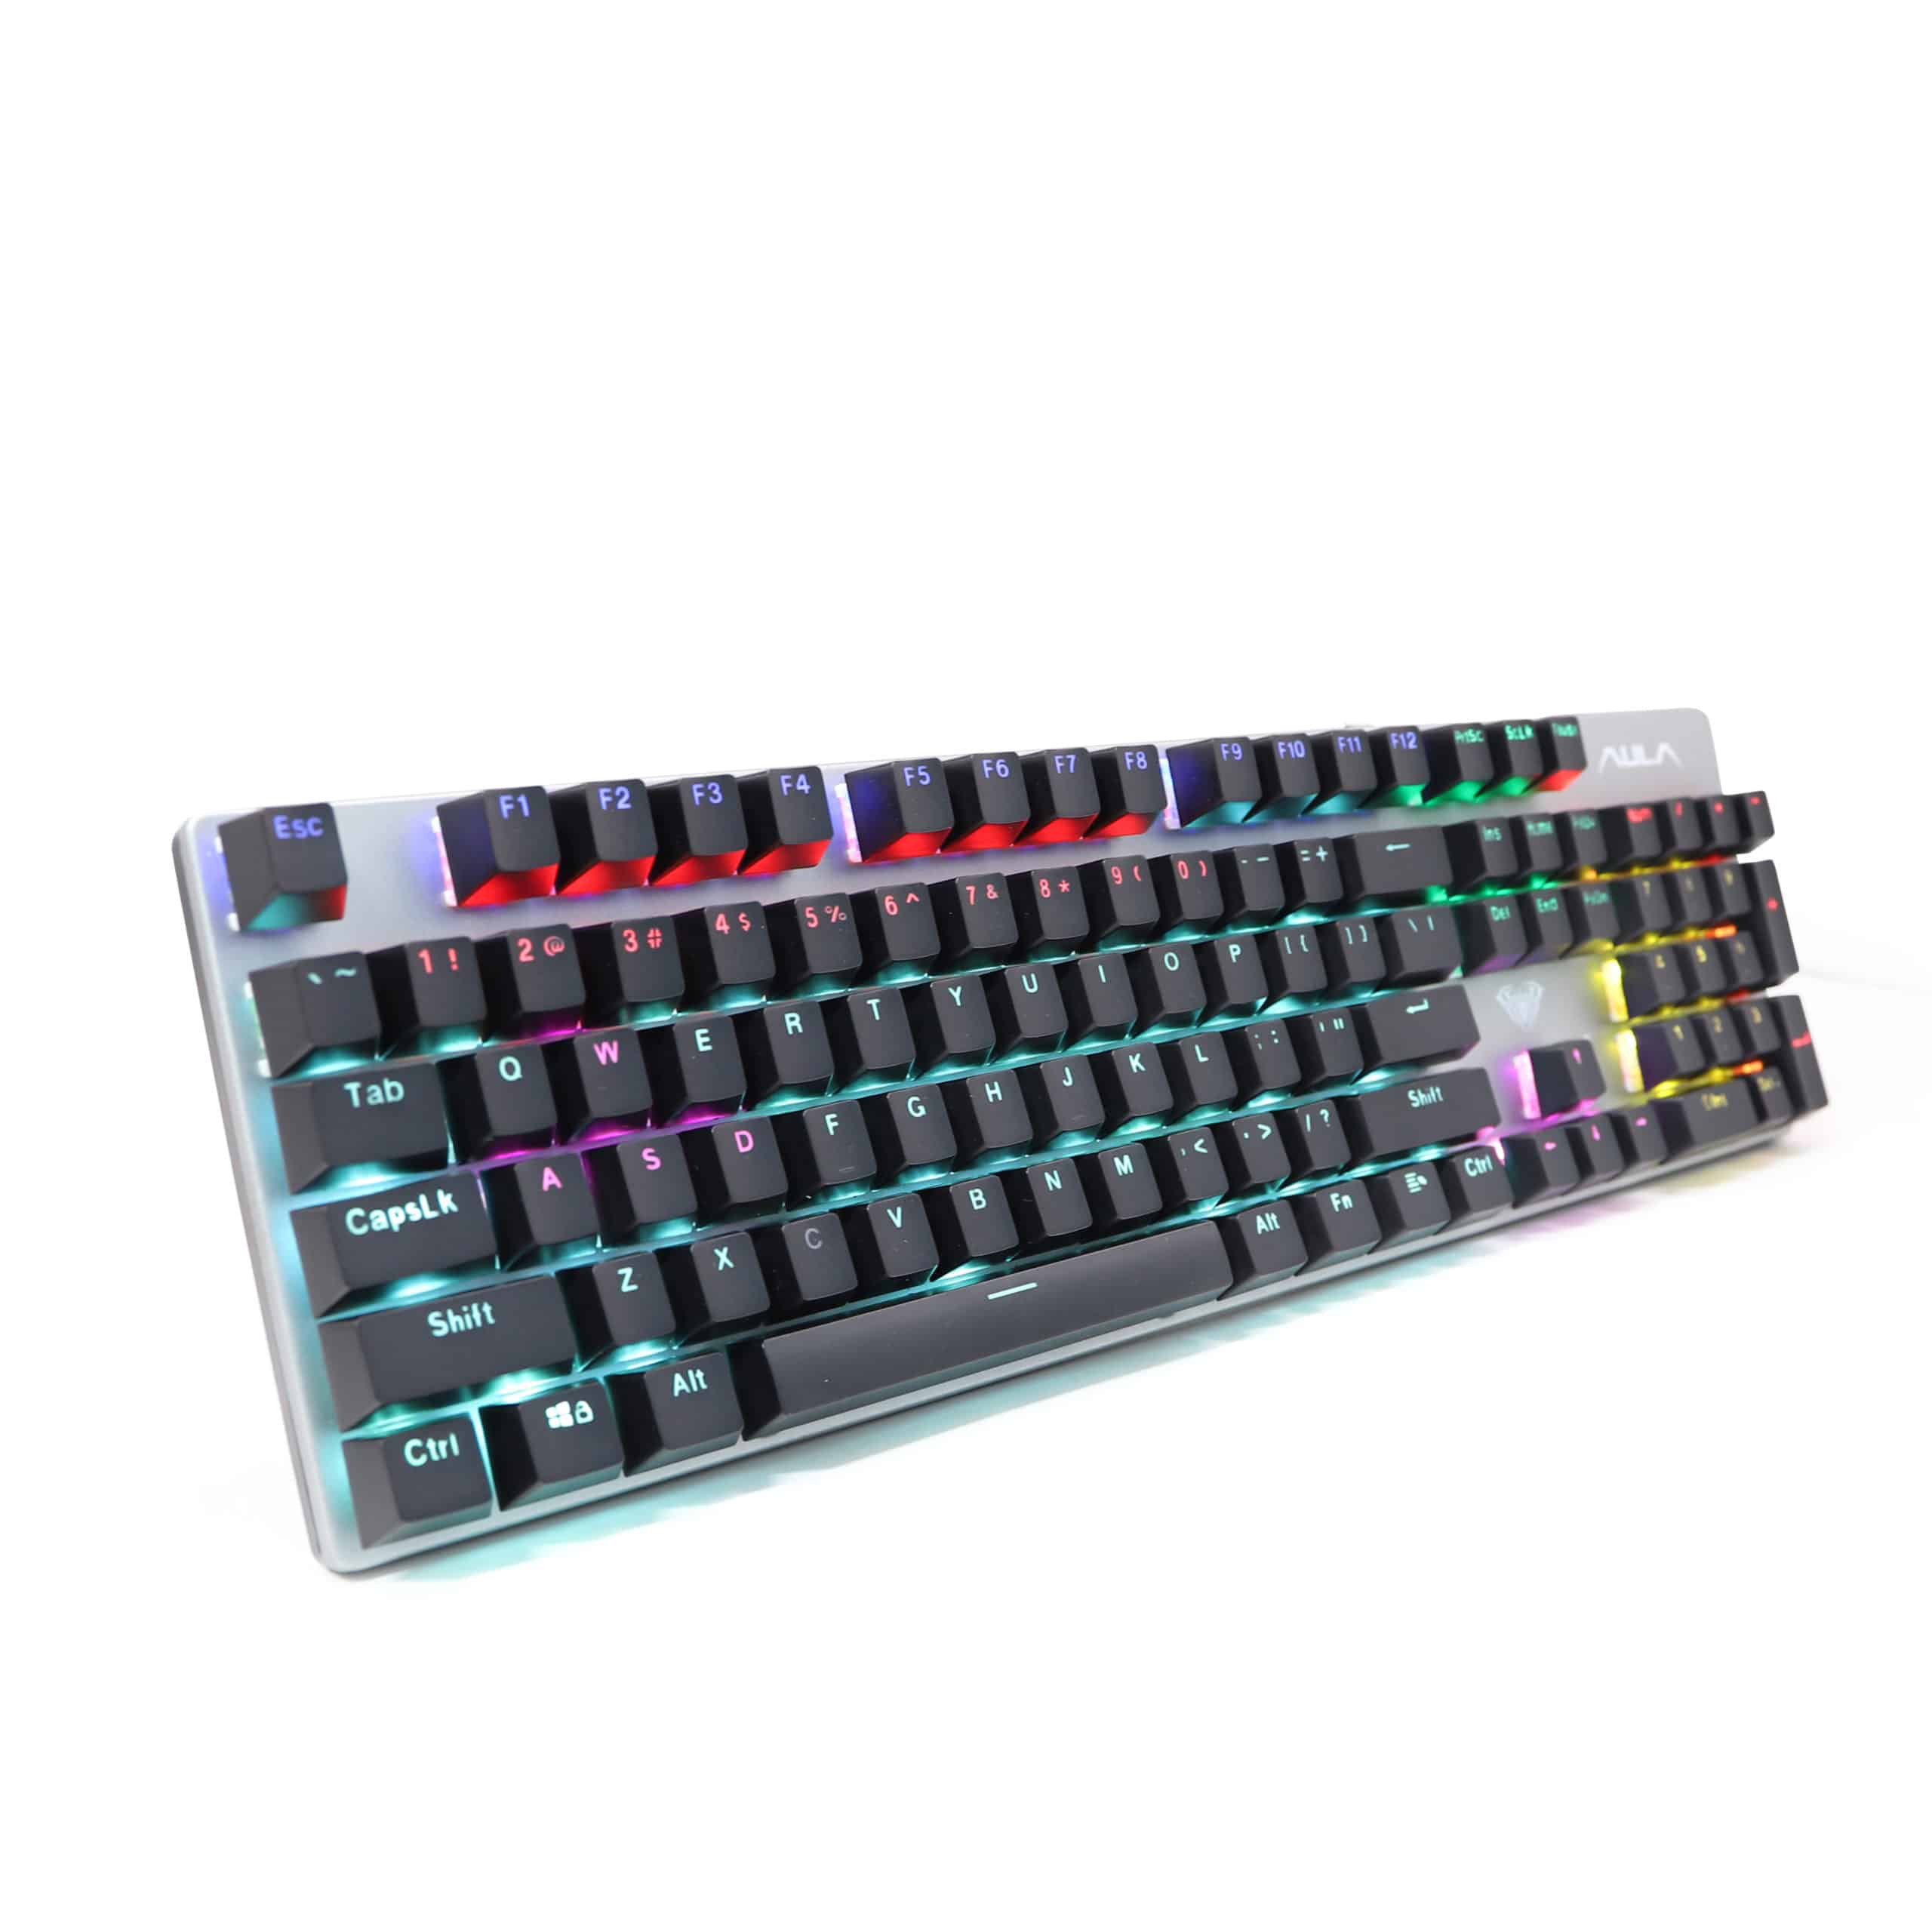 Aula Wired Gaming Keyboard, Black and Grey - F2068